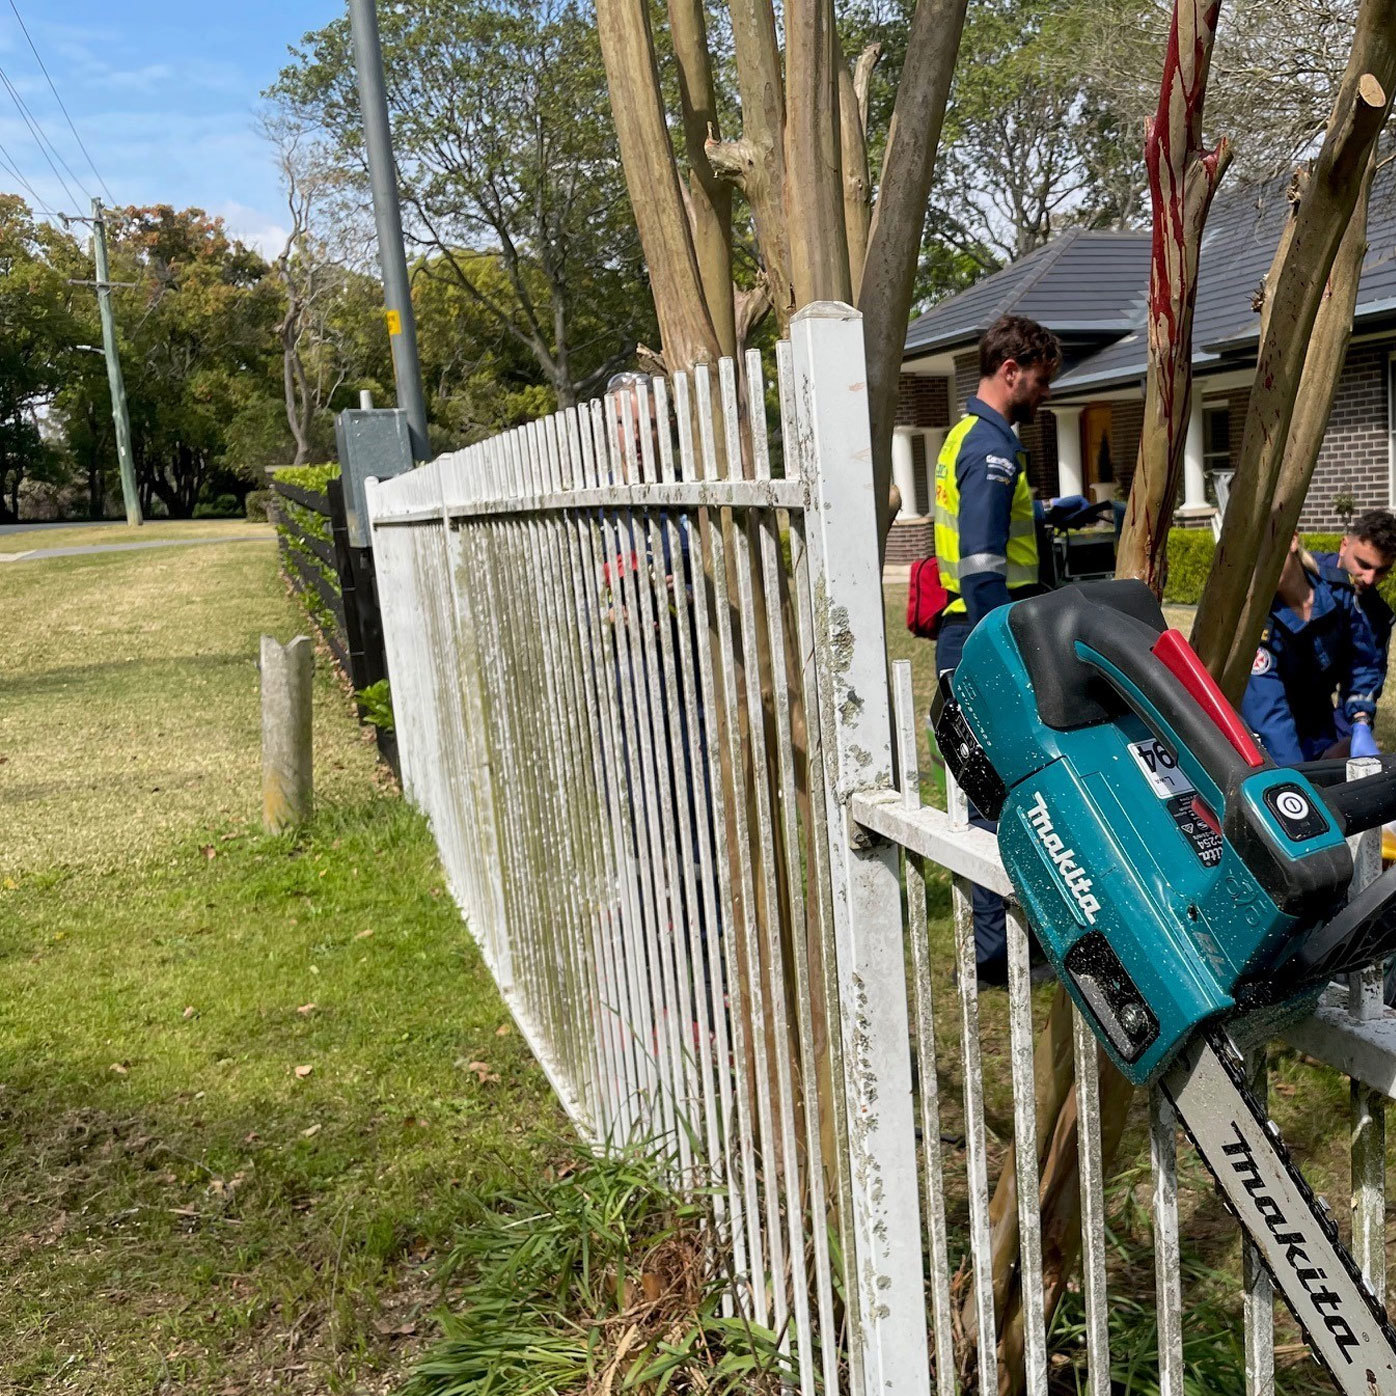 A man in his late 70s has been hospitalised after a chainsaw accident in Sydney's north west.